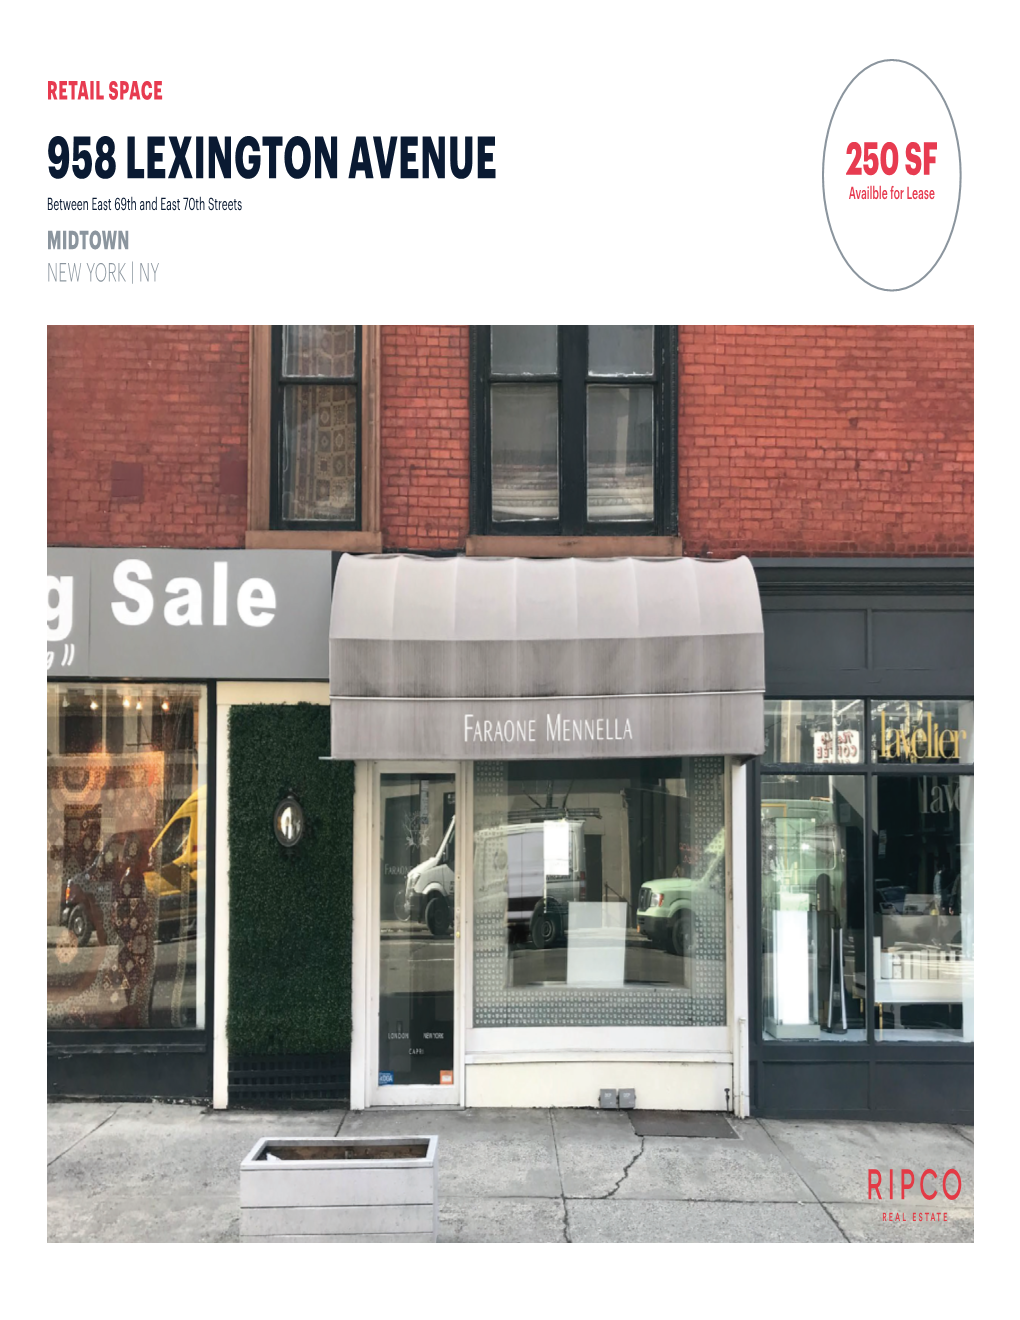 958 LEXINGTON AVENUE 250 SF Availble for Lease Between East 69Th and East 70Th Streets MIDTOWN NEW YORK | NY SPACE DETAILS